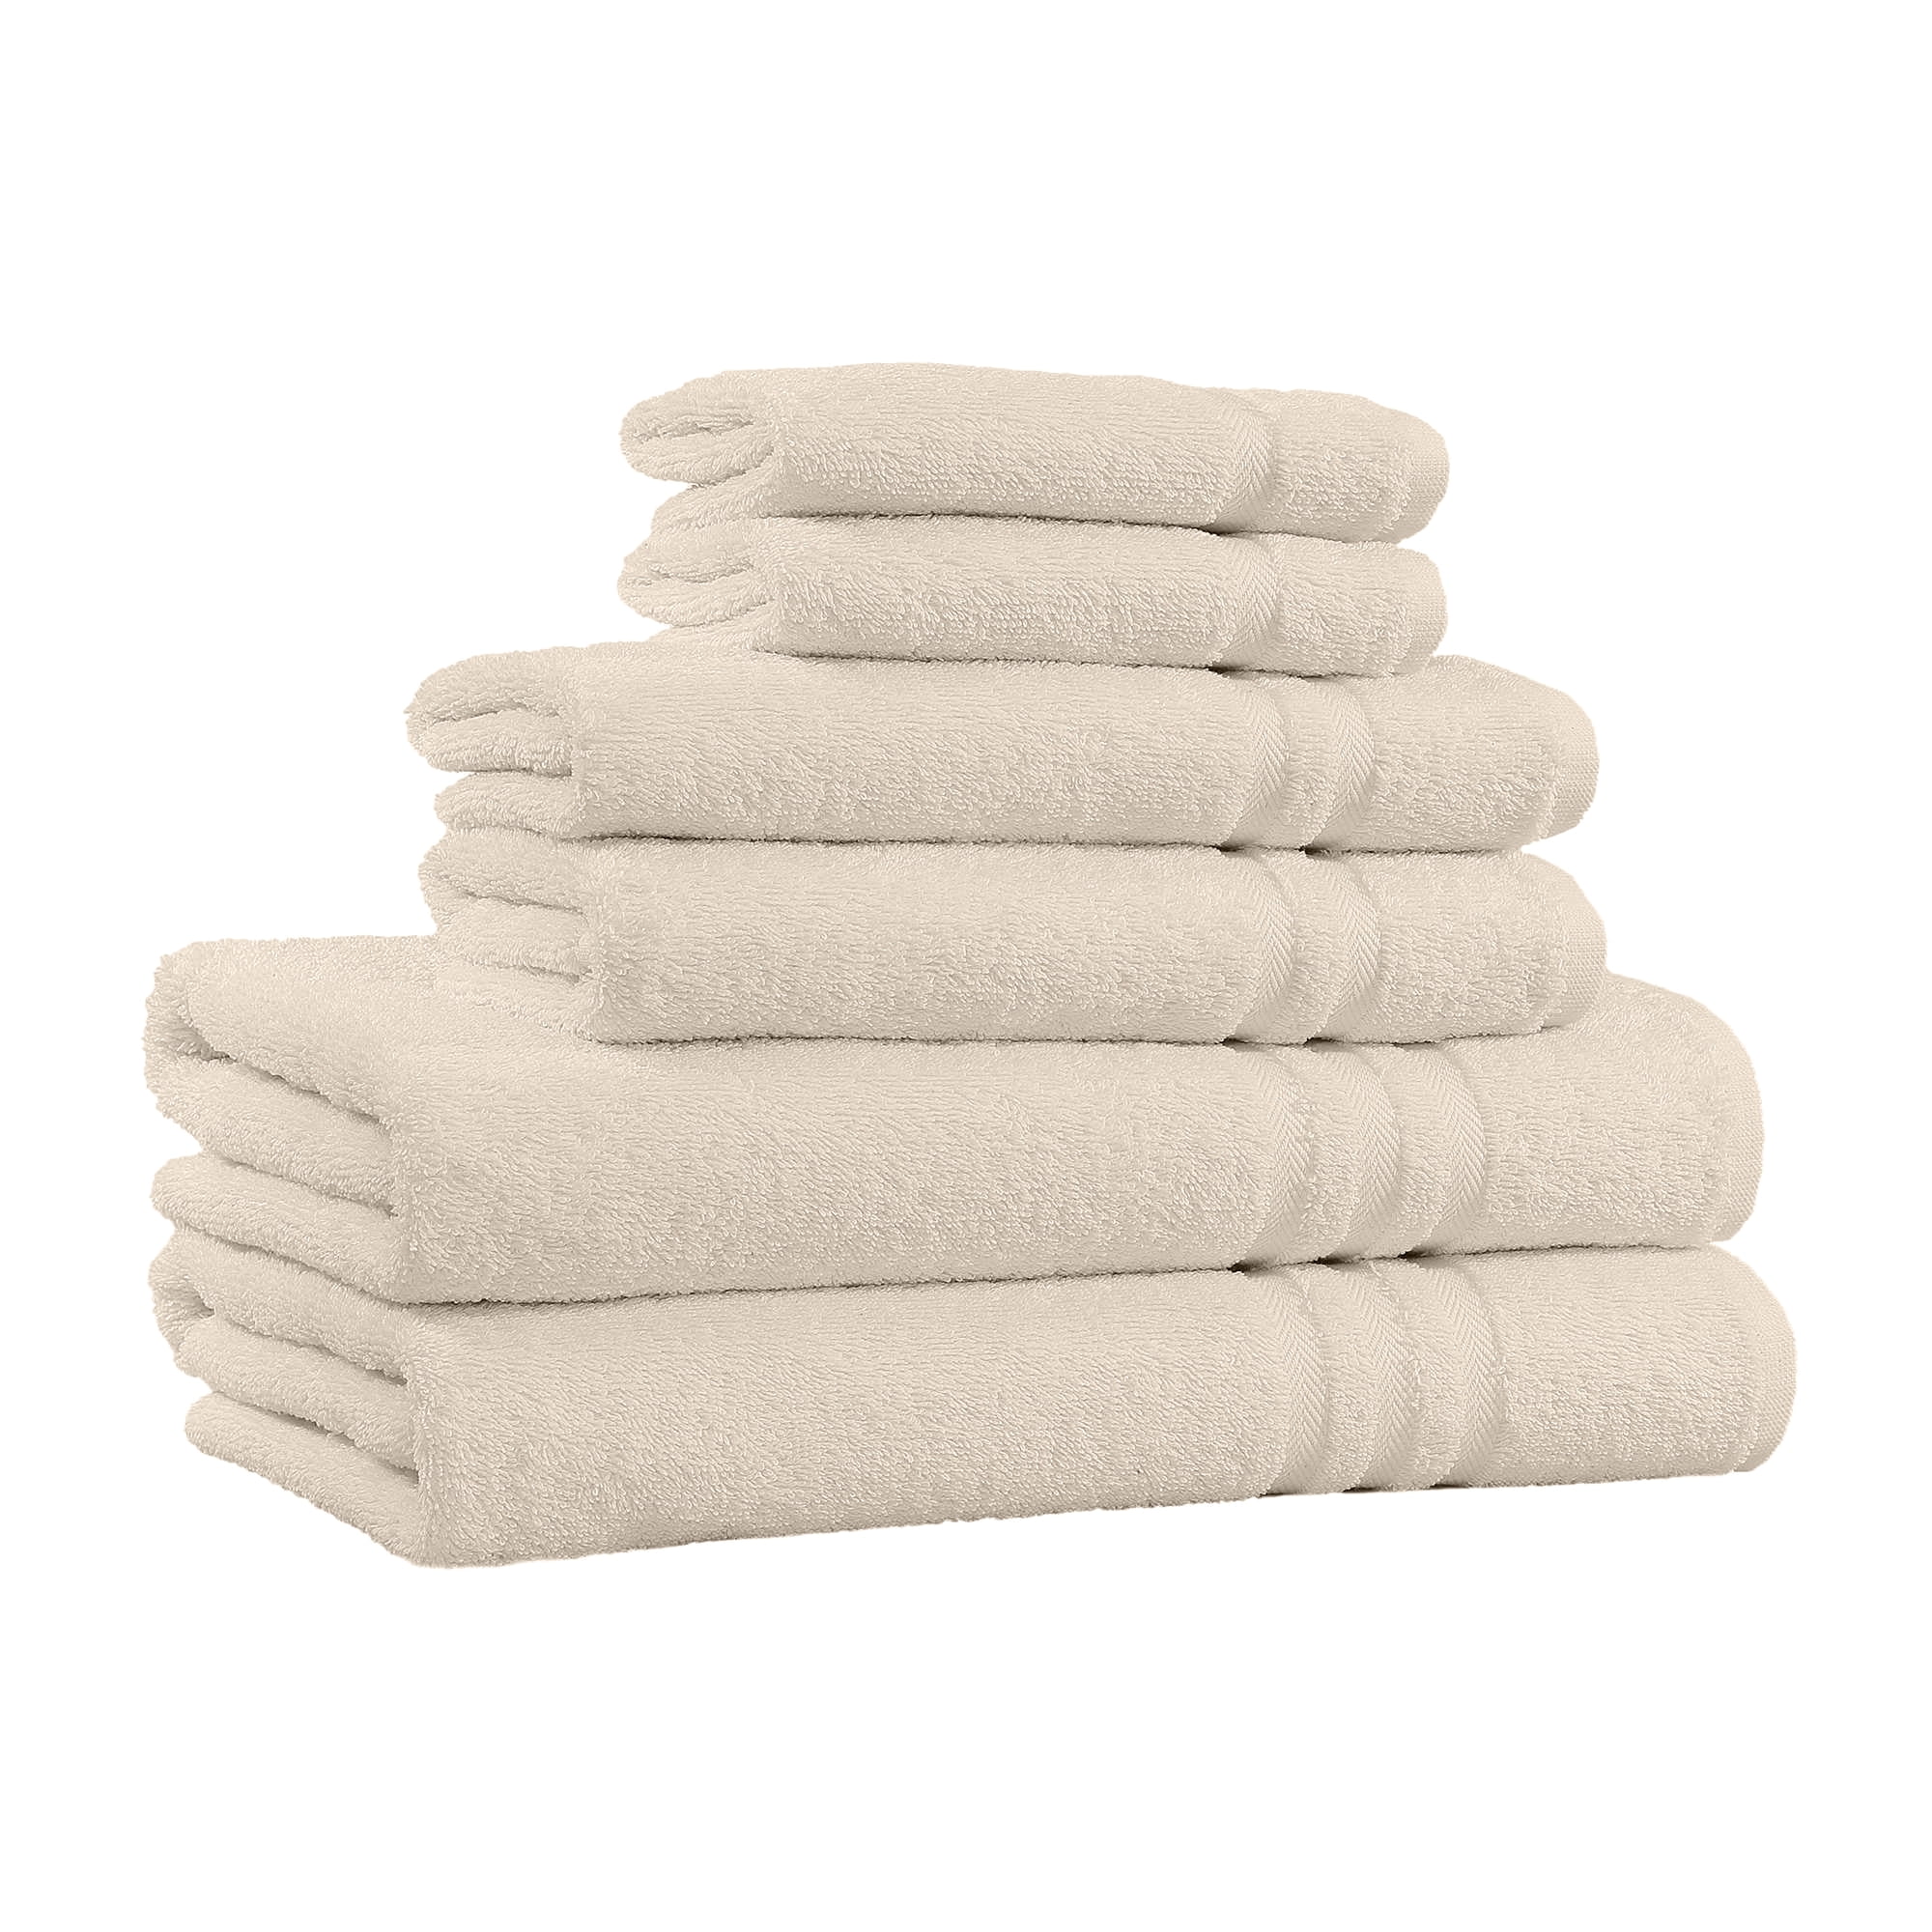 SUPER SOFT 100% COMBED EGYPTIAN COTTON BATH TOWEL PACK OF 2 TOWELS 650 GSM 